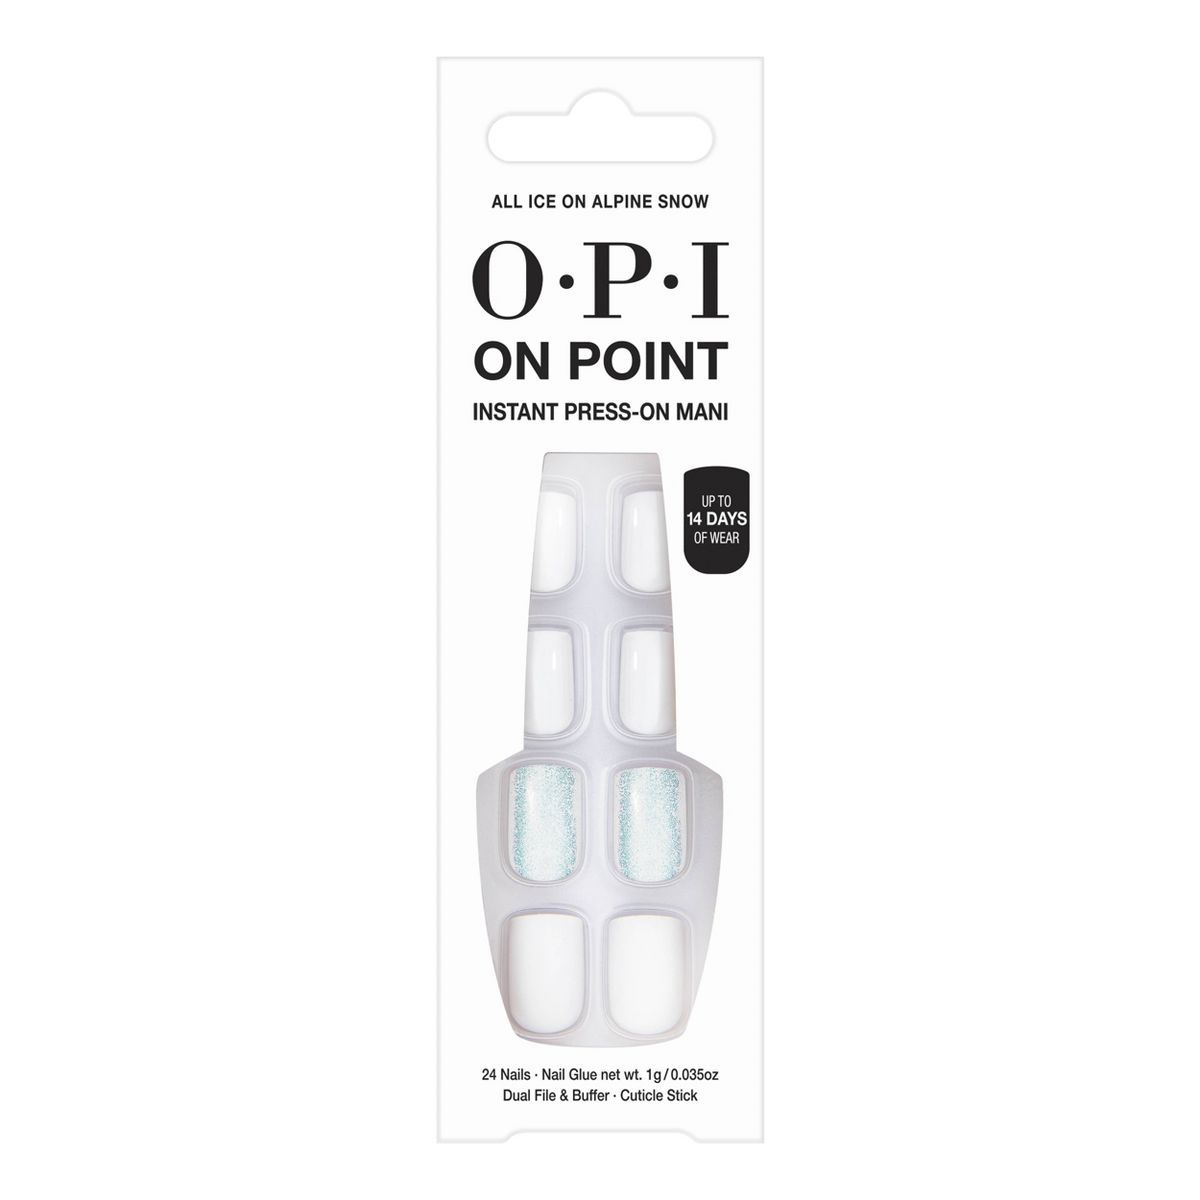 OPI Press-On Fake Nails - All Ice On Alpine Snow - 26ct | Target